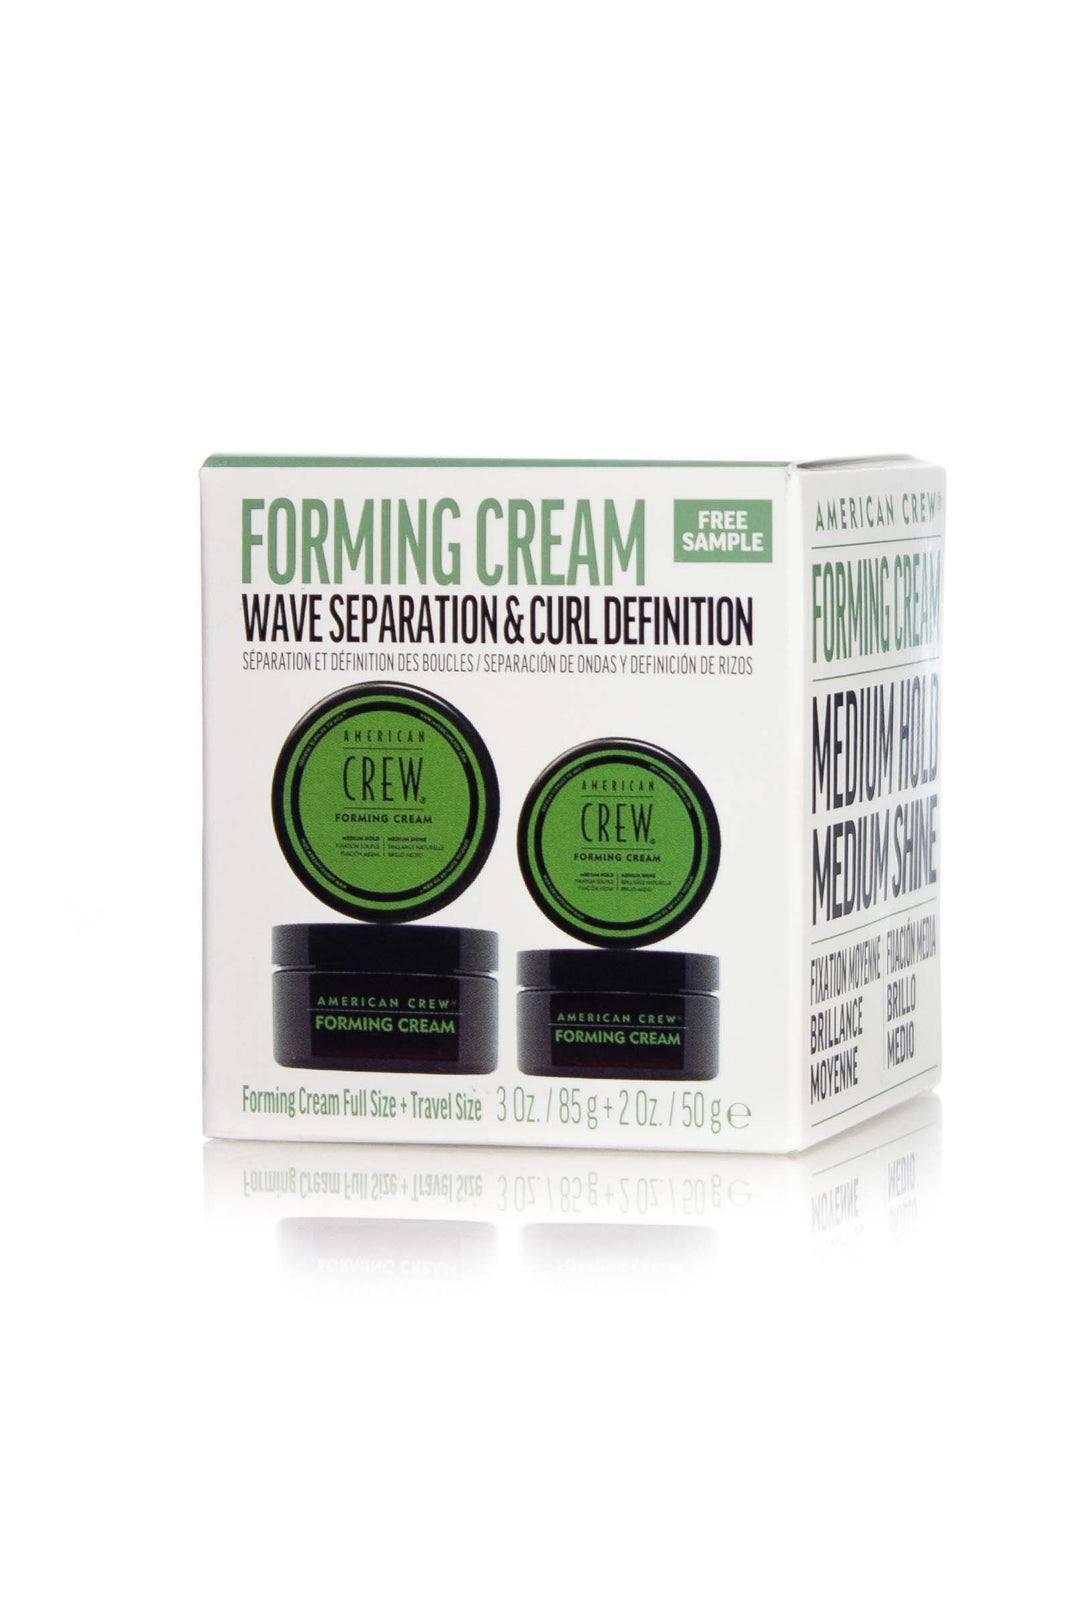 AMERICAN CREW FORMING CREAM DUO FULL SIZE + TRAVEL SIZE